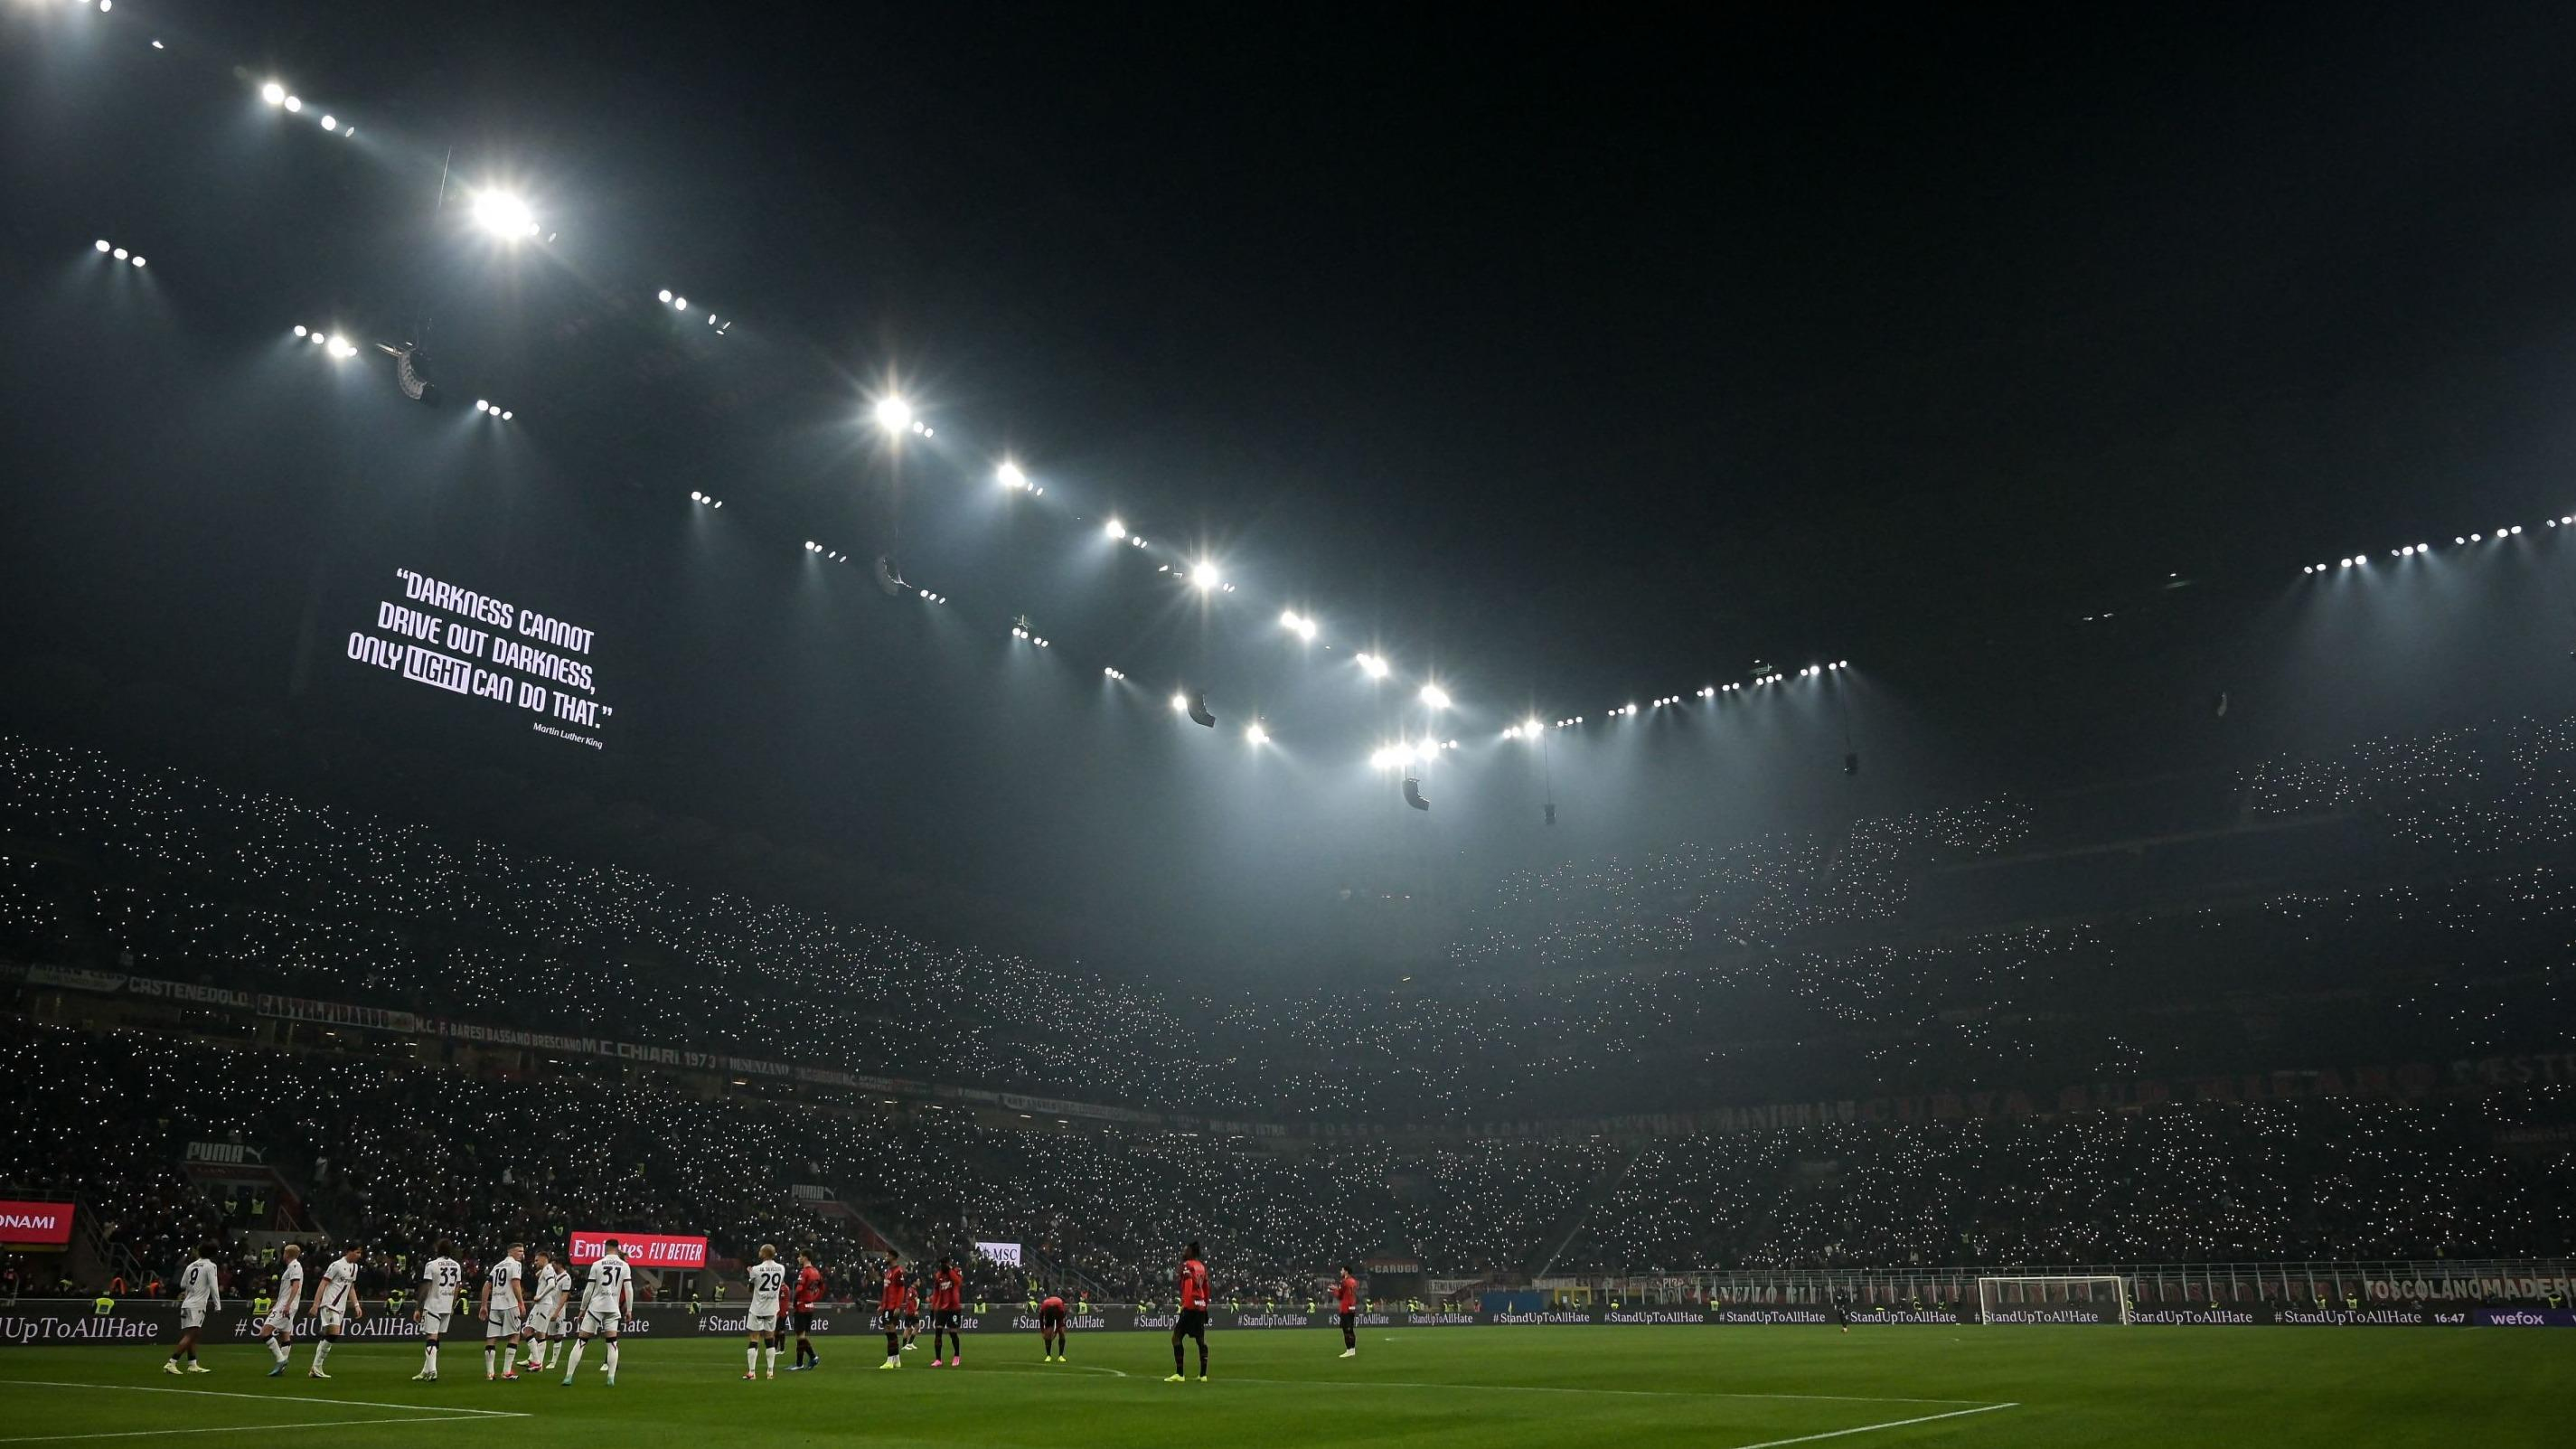 Foot: According to a survey, monkey cries in a stadium are justified for 16% of Italians